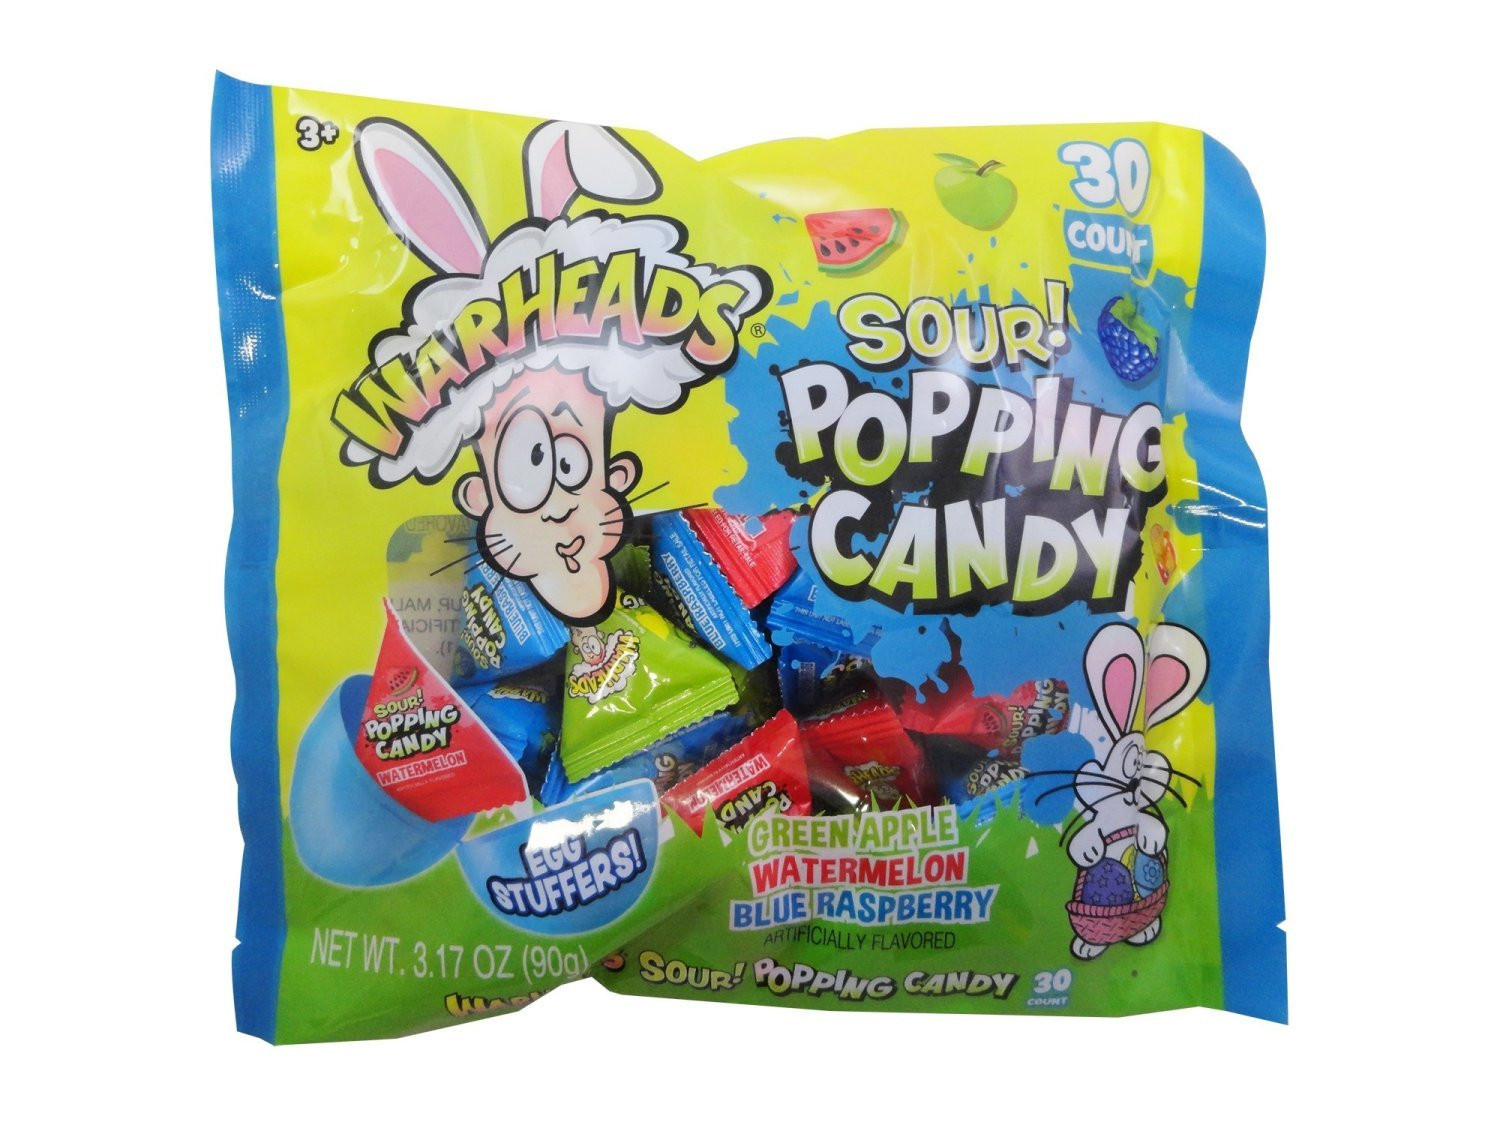 Waheads Warheads Easter SOUR 30ct. Popping Candy Laydown Bag 3.17oz.